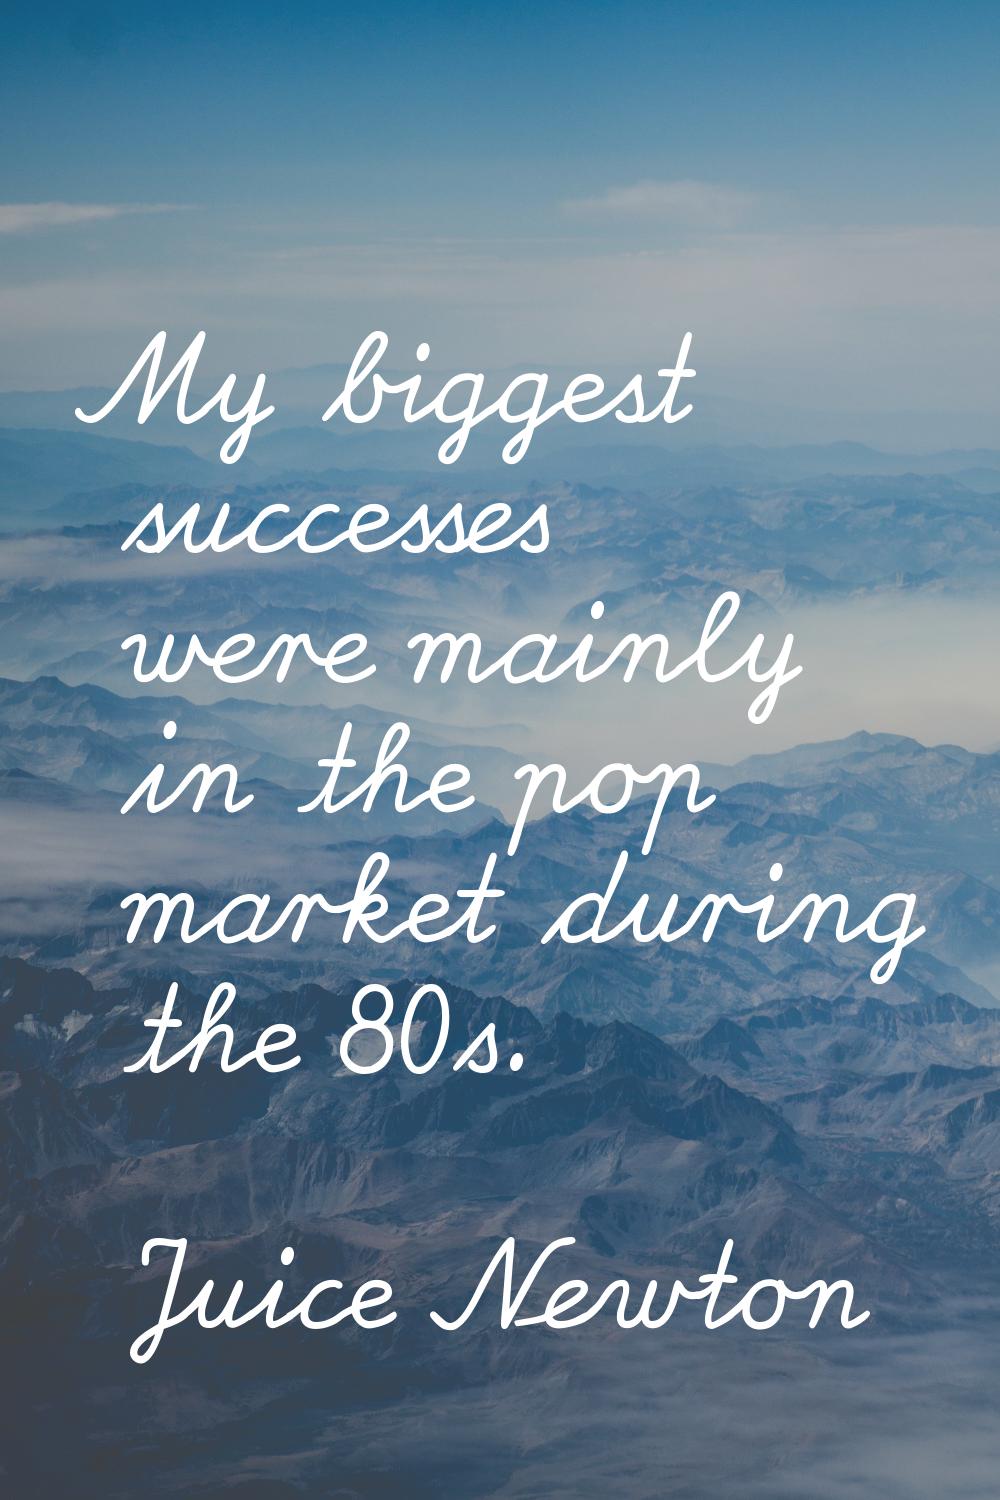 My biggest successes were mainly in the pop market during the 80s.